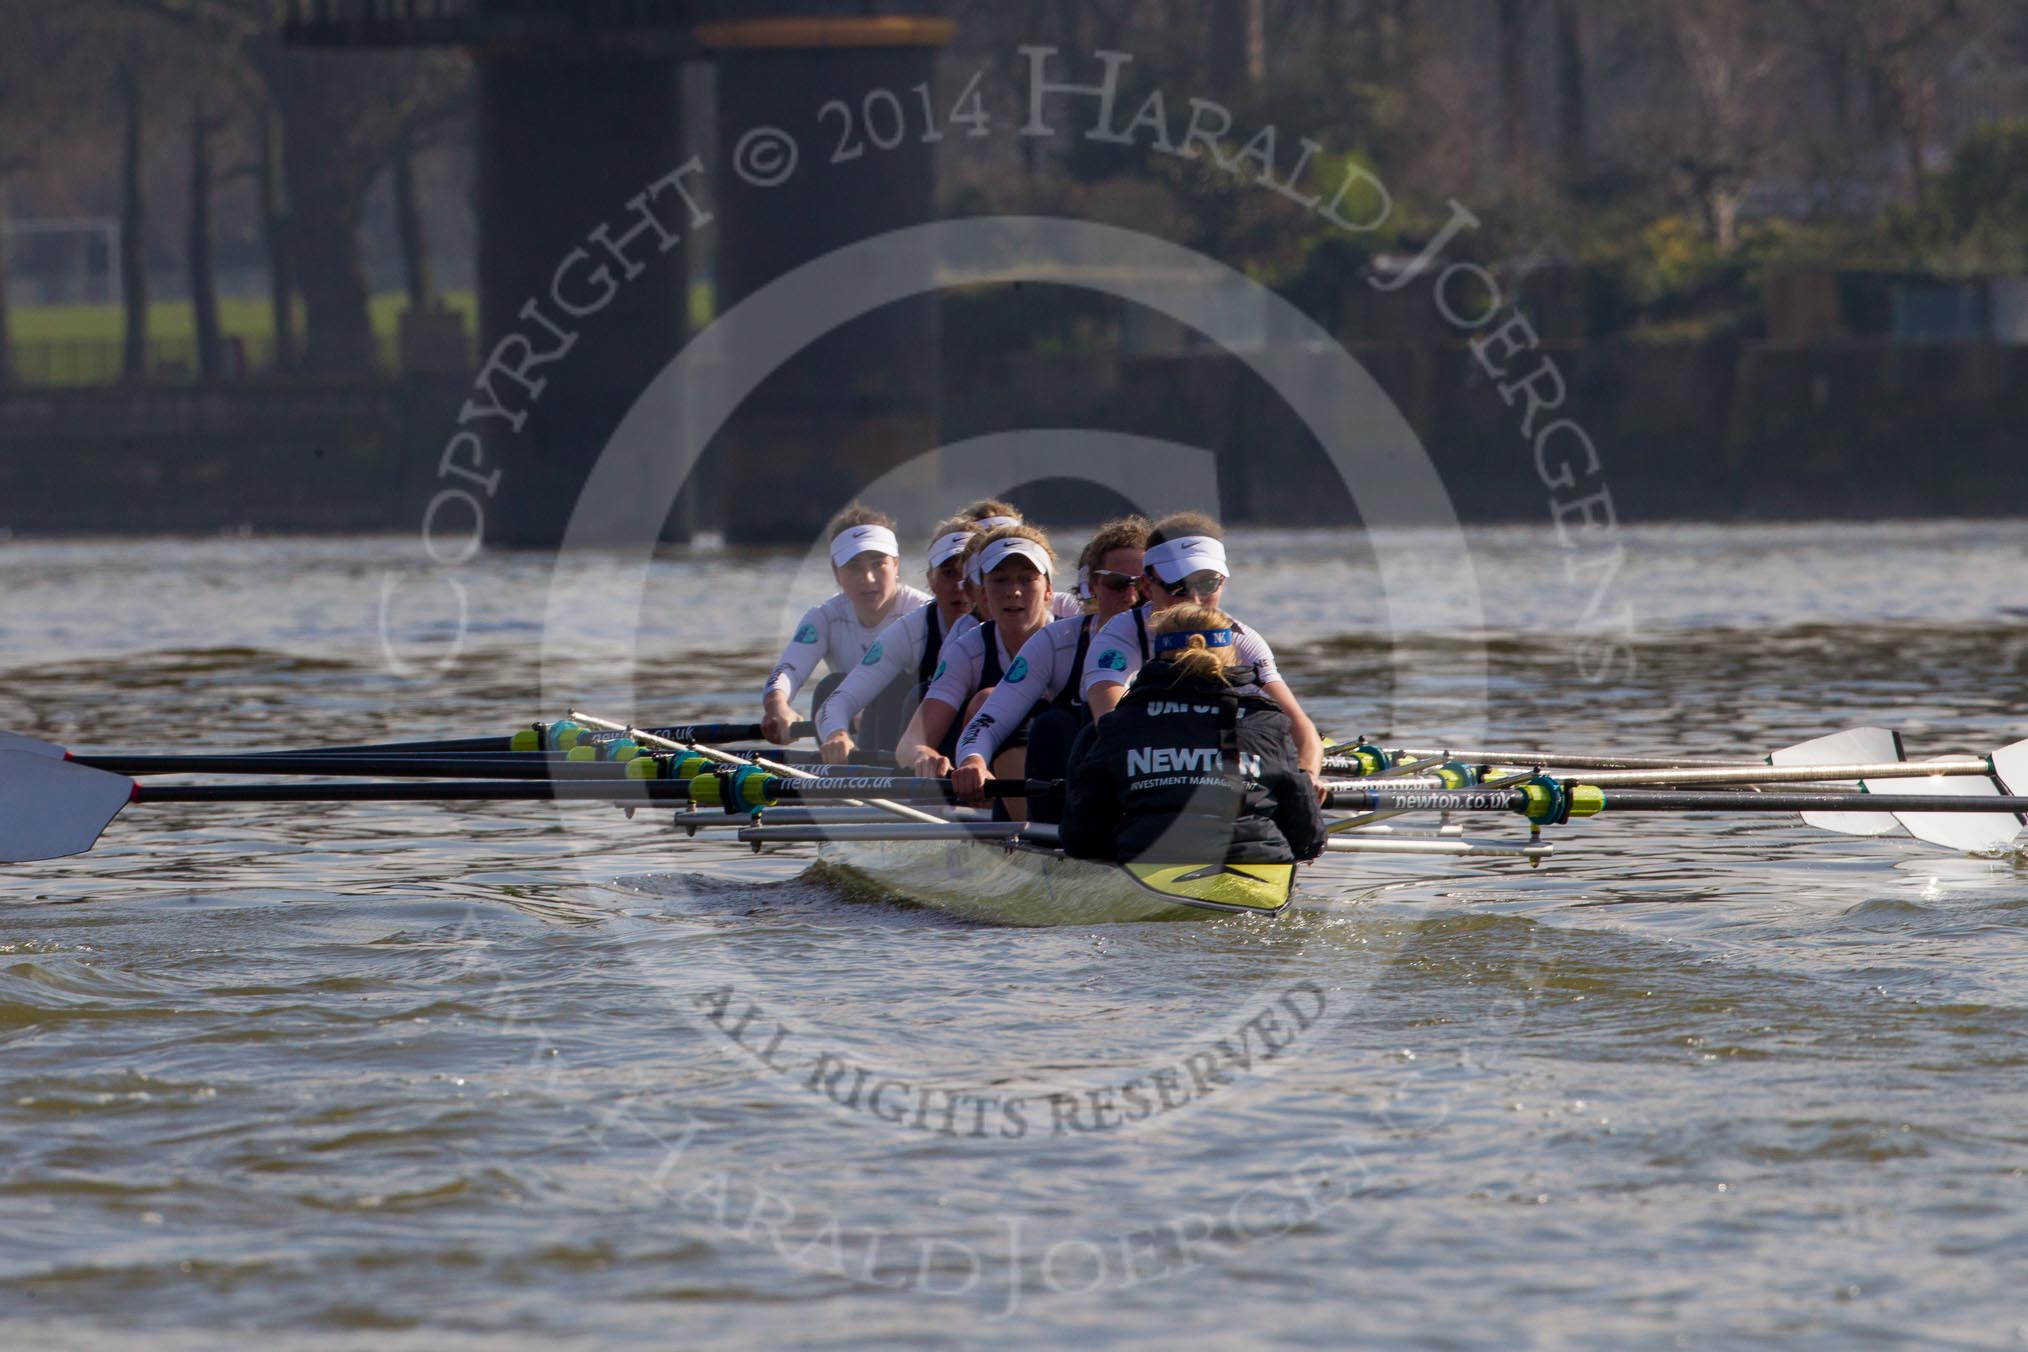 The Boat Race season 2014 - fixture OUWBC vs Molesey BC.




on 01 March 2014 at 12:59, image #140